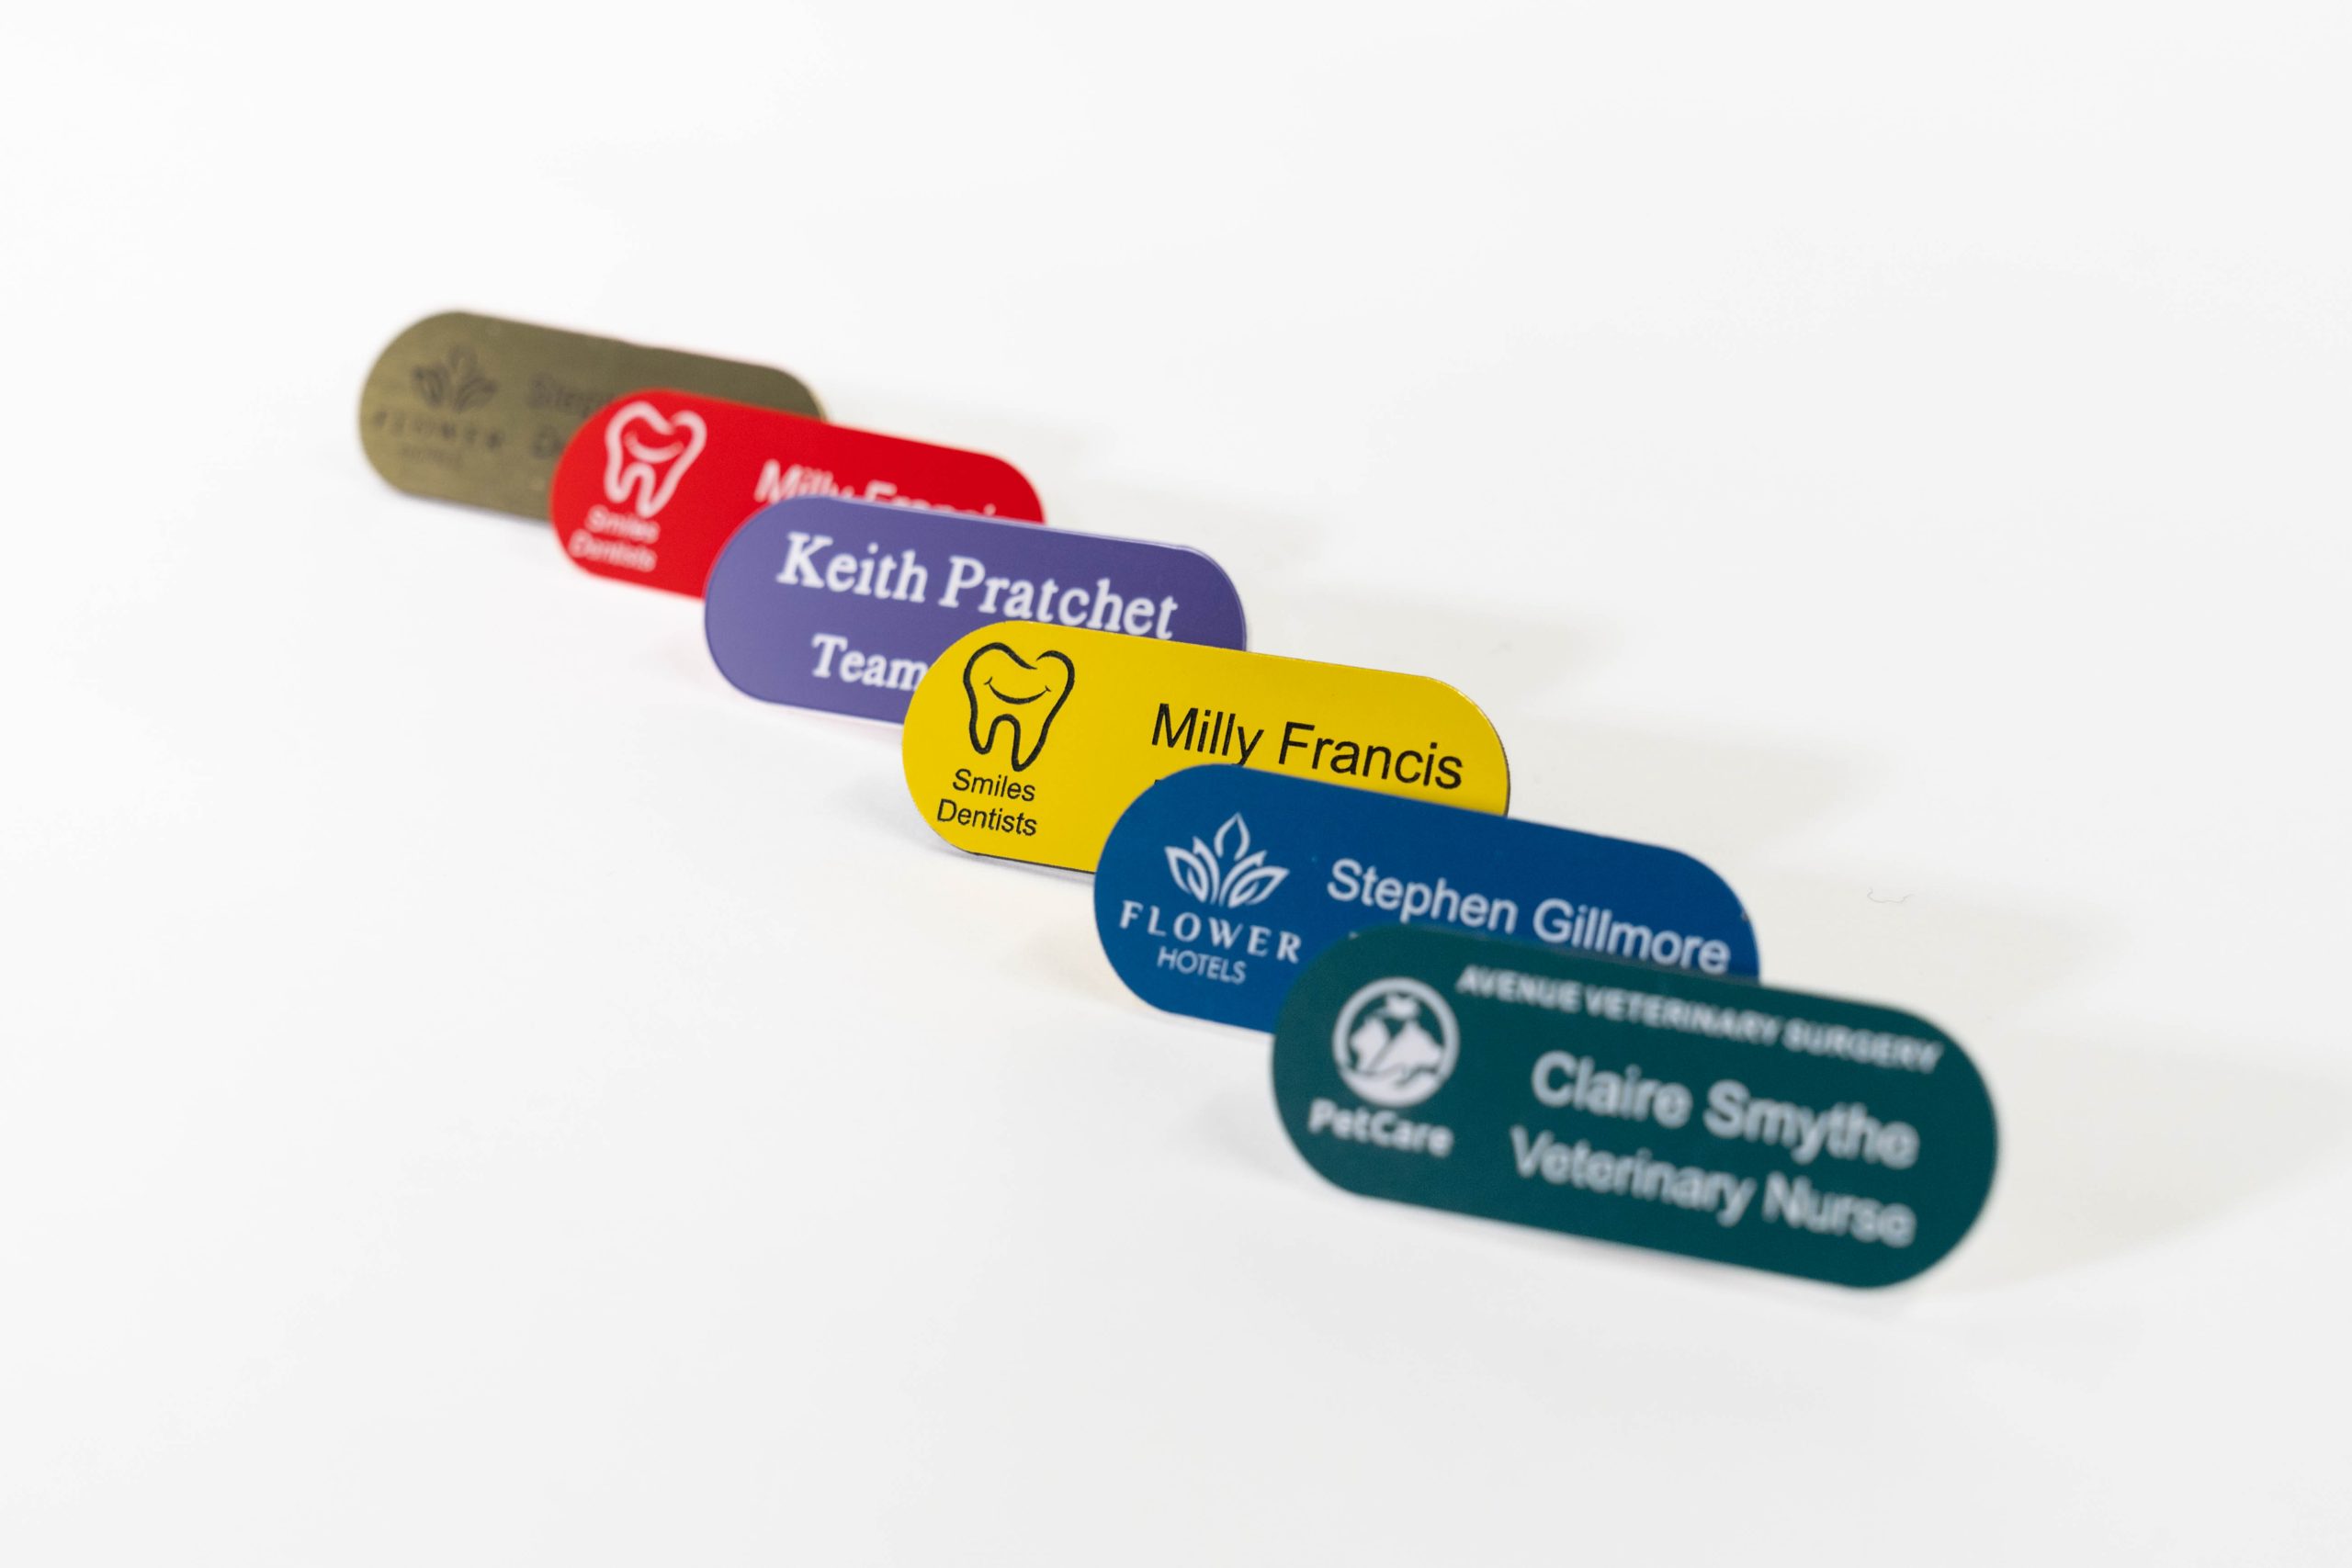 Various pill shaped engraved name badges with and without logos on the left.